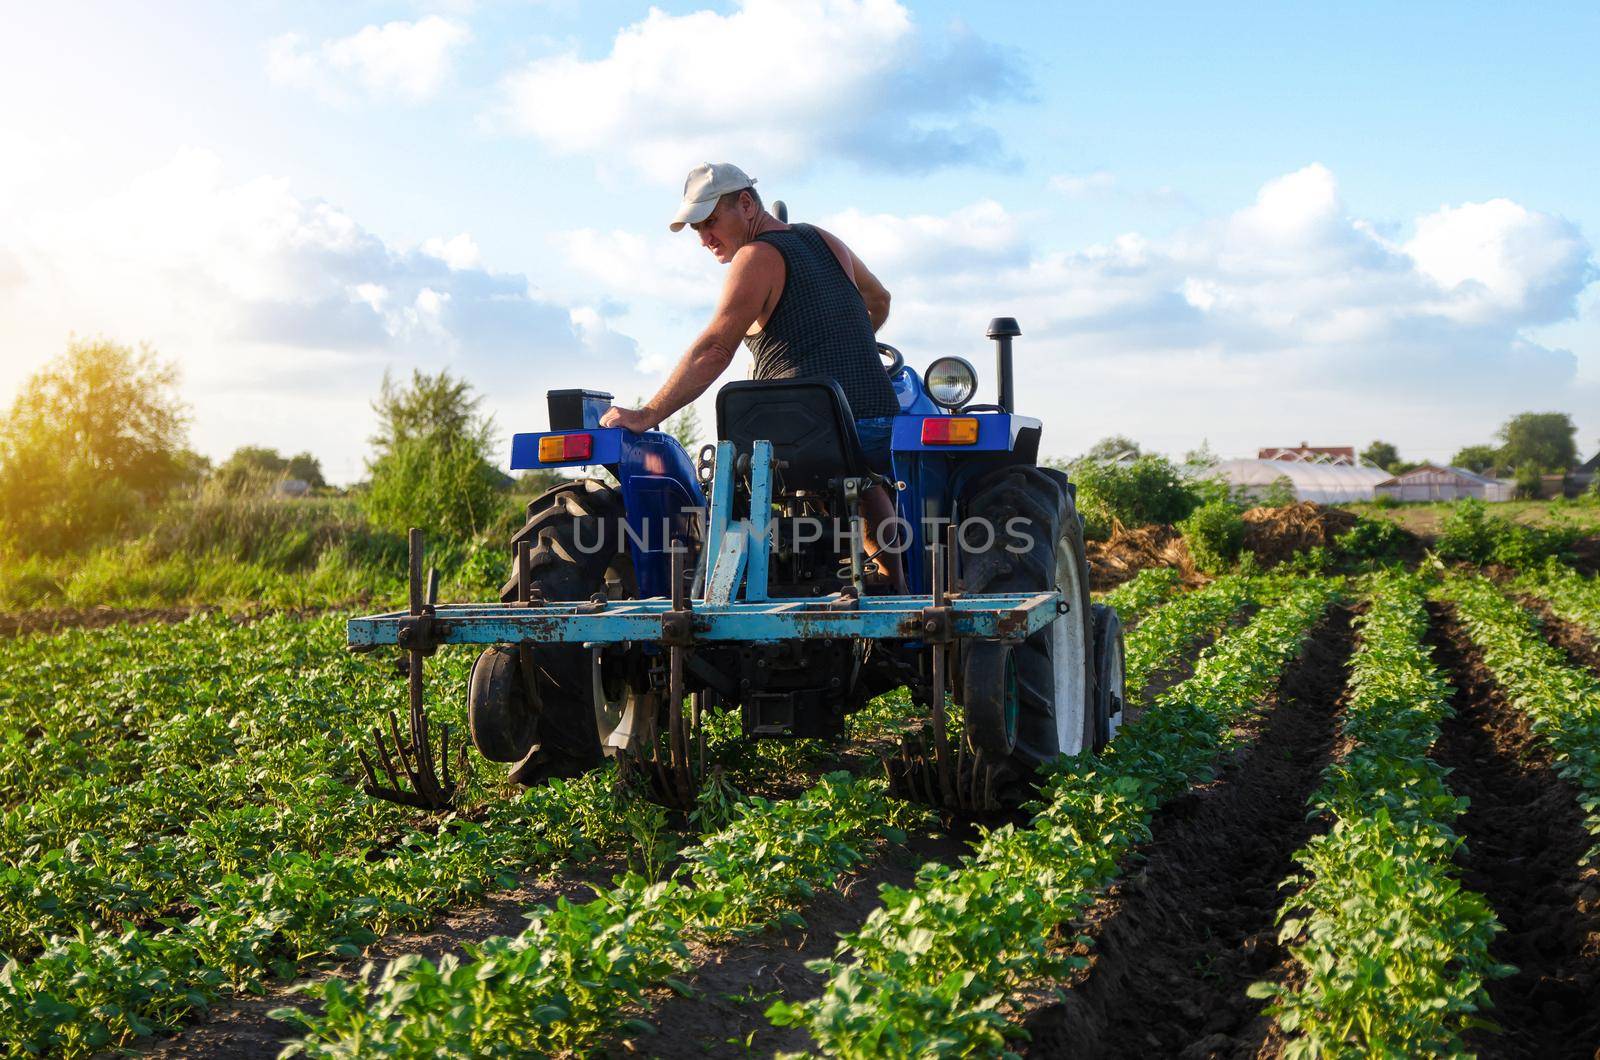 The farmer works in the field with a tractor. Agroindustry and agribusiness. Farming machinery. Plowing and loosening ground. Crop care, soil quality improvement. Farm field work cultivation. by iLixe48